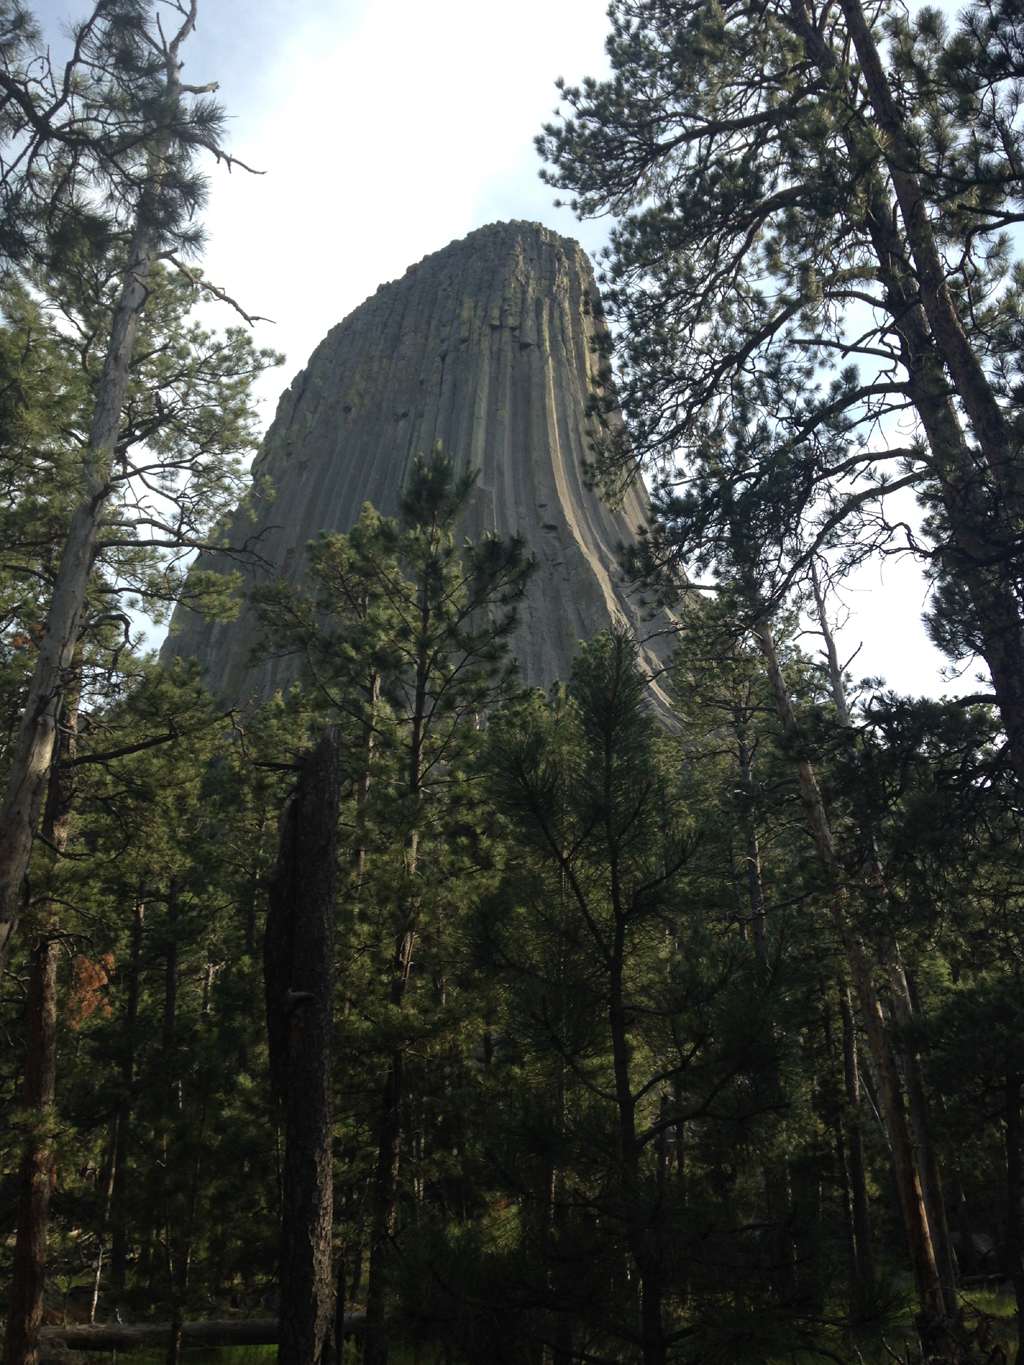 Devil's Tower rising above the trees.